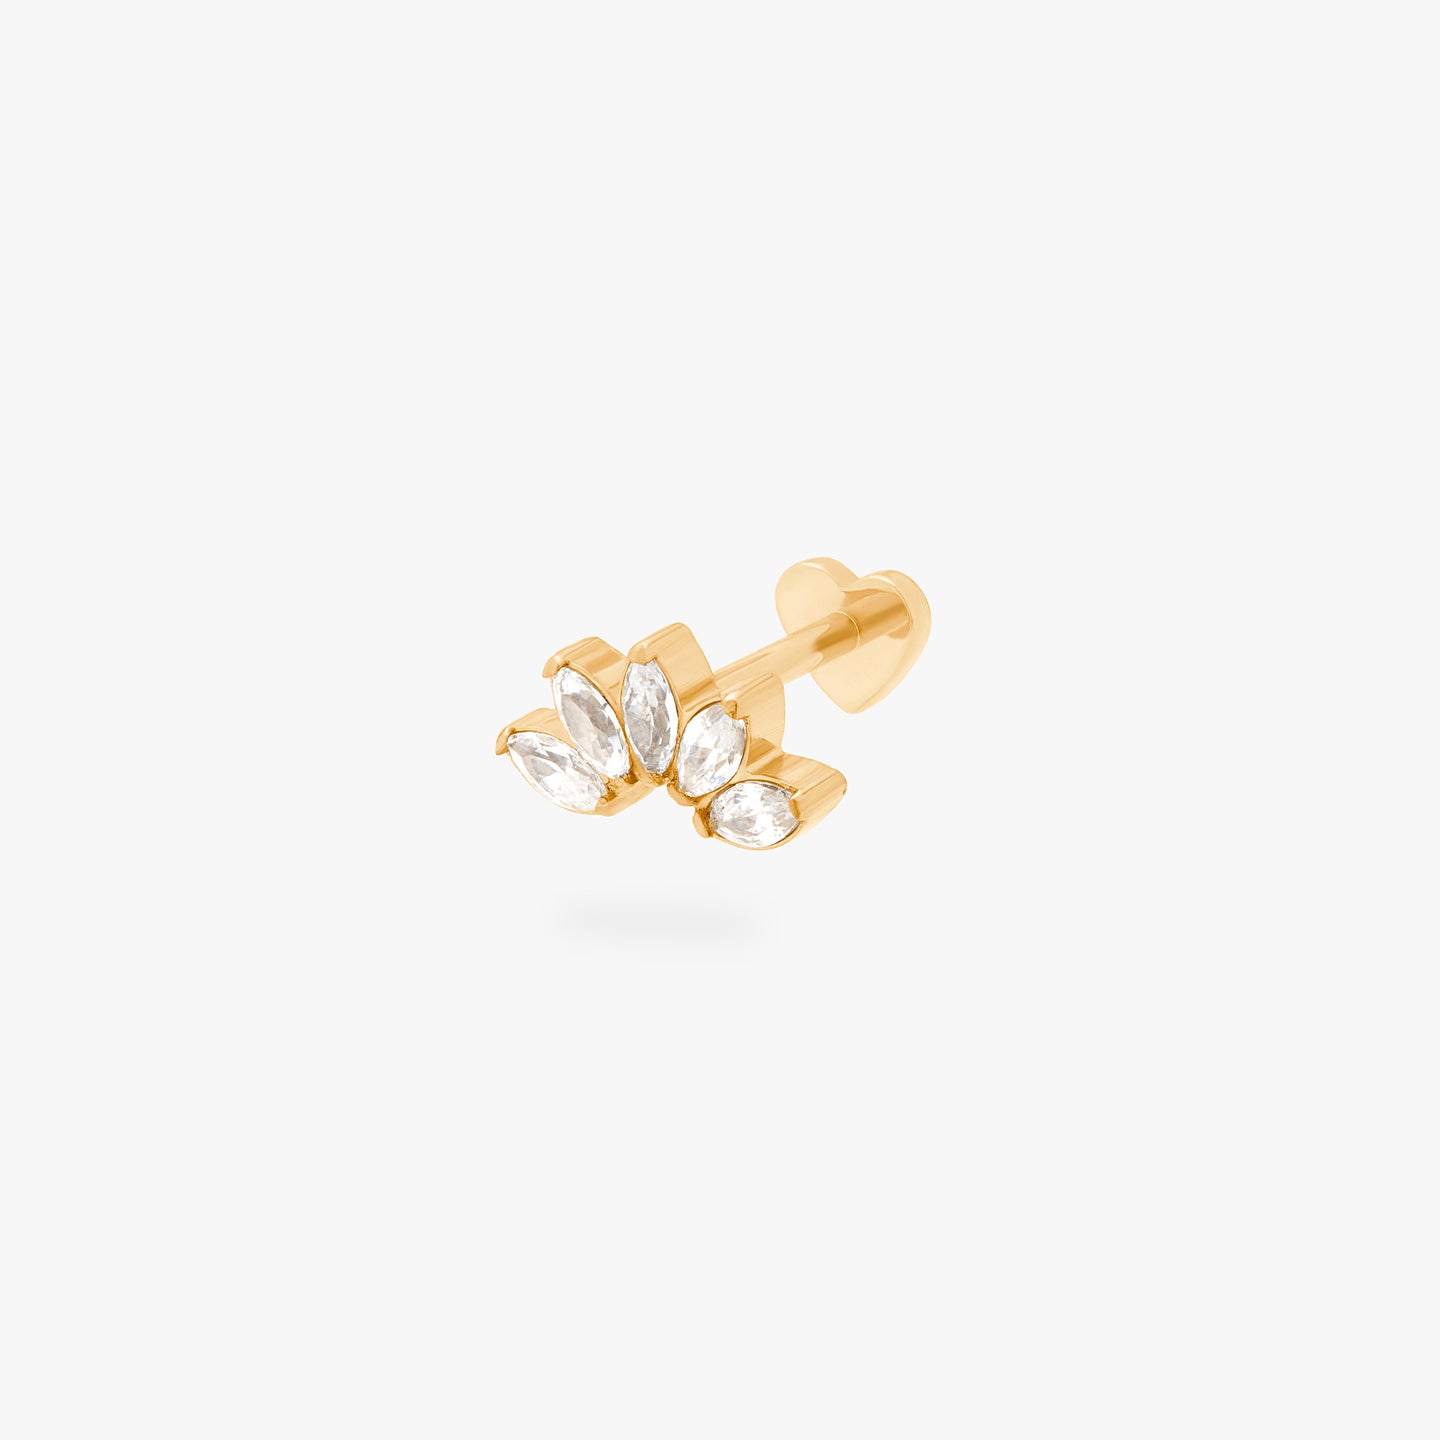 This is an image of a gold/clear crown shaped flatback top that has 5 marquise shaped CZs and a heart-shaped gold flatback post. color:null|gold/clear